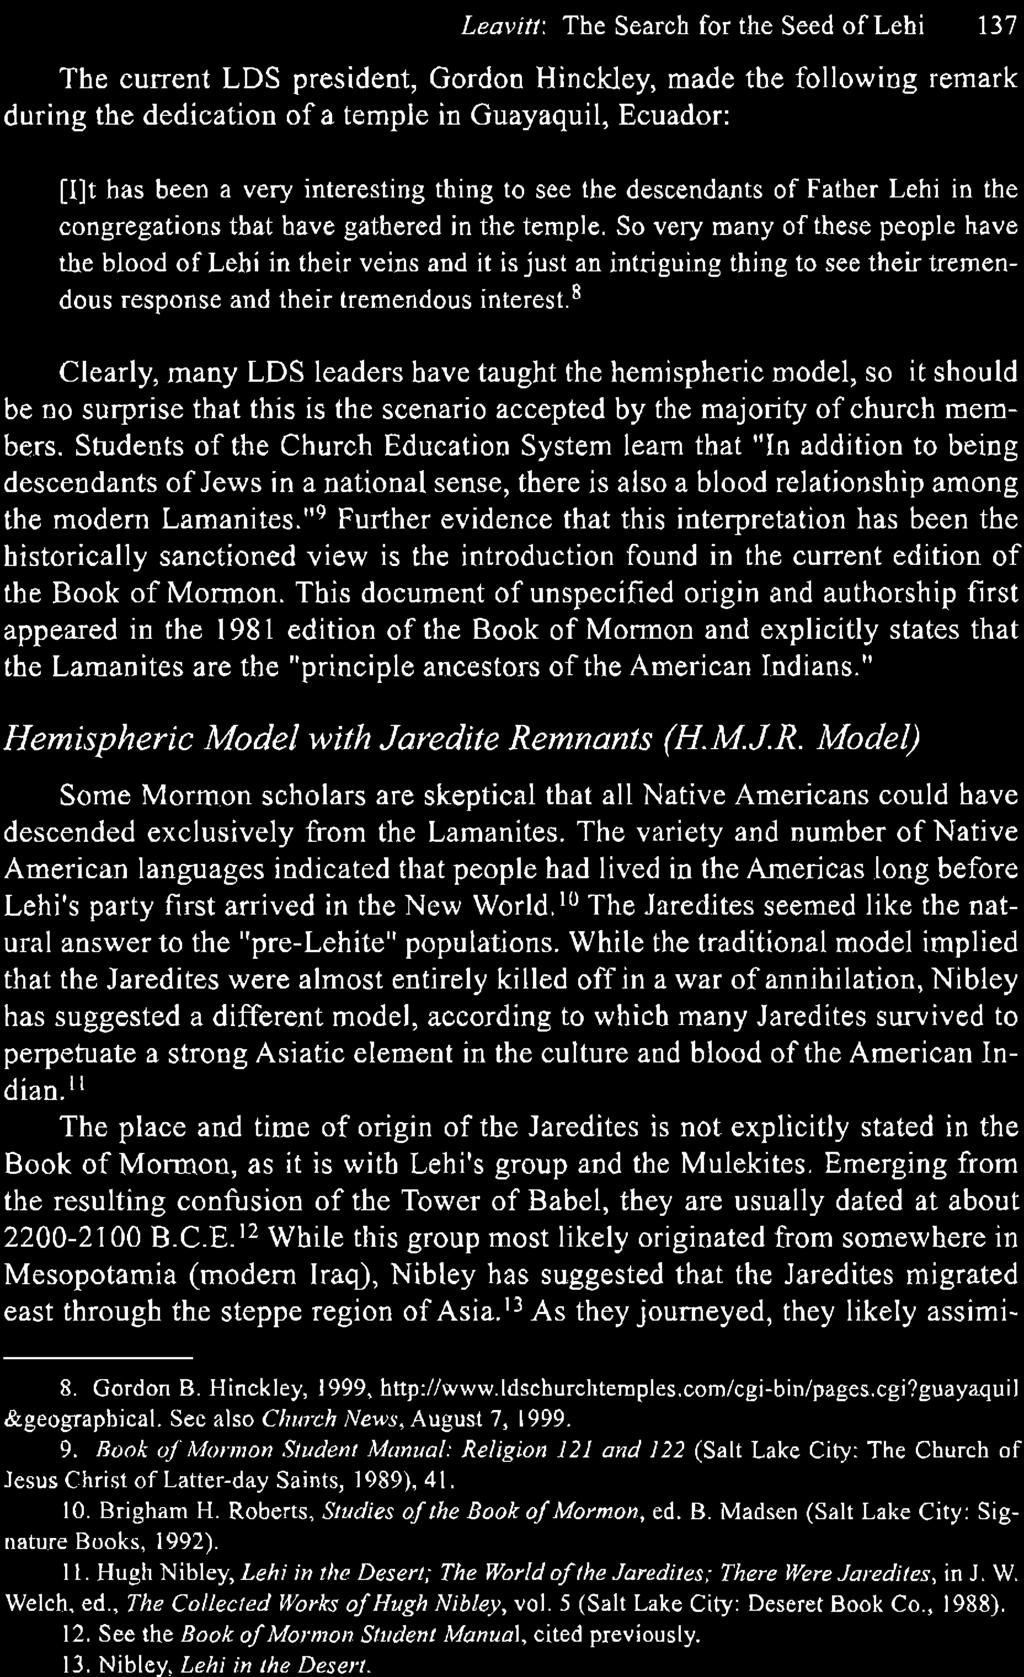 This document of unspecified origin and authorship first appeared in the 1981 edition of the Book of Mormon and explicitly states that the Lamanites are the "principle ancestors of the American